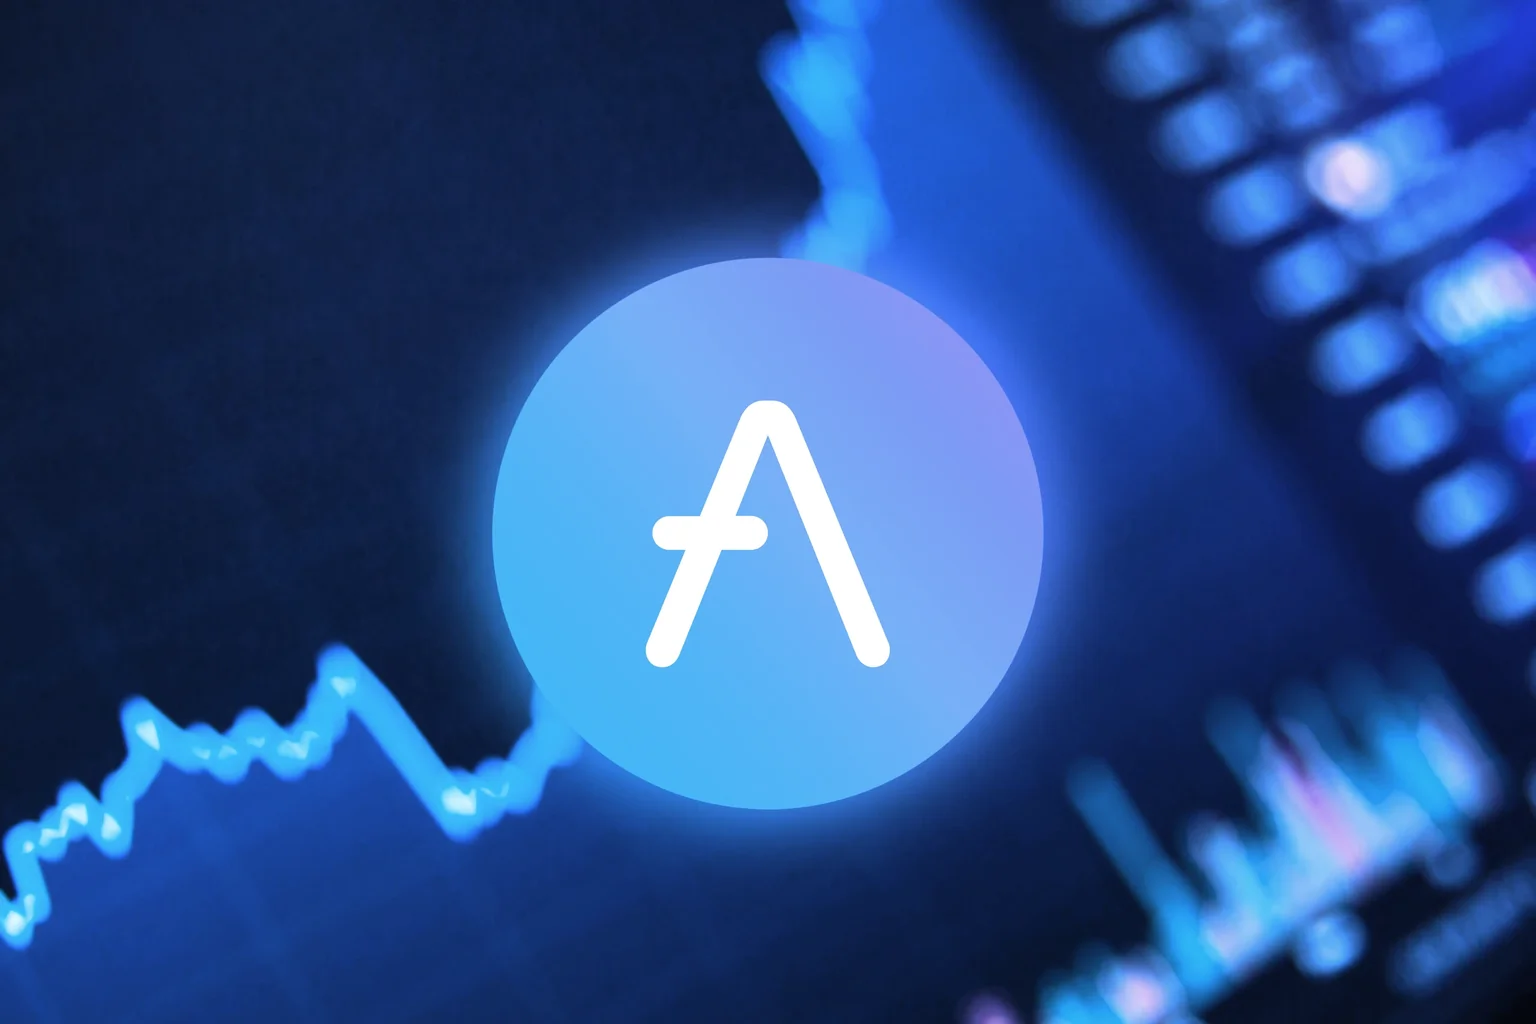 Aave is a decentralized lending protocol. Image: Shutterstock.